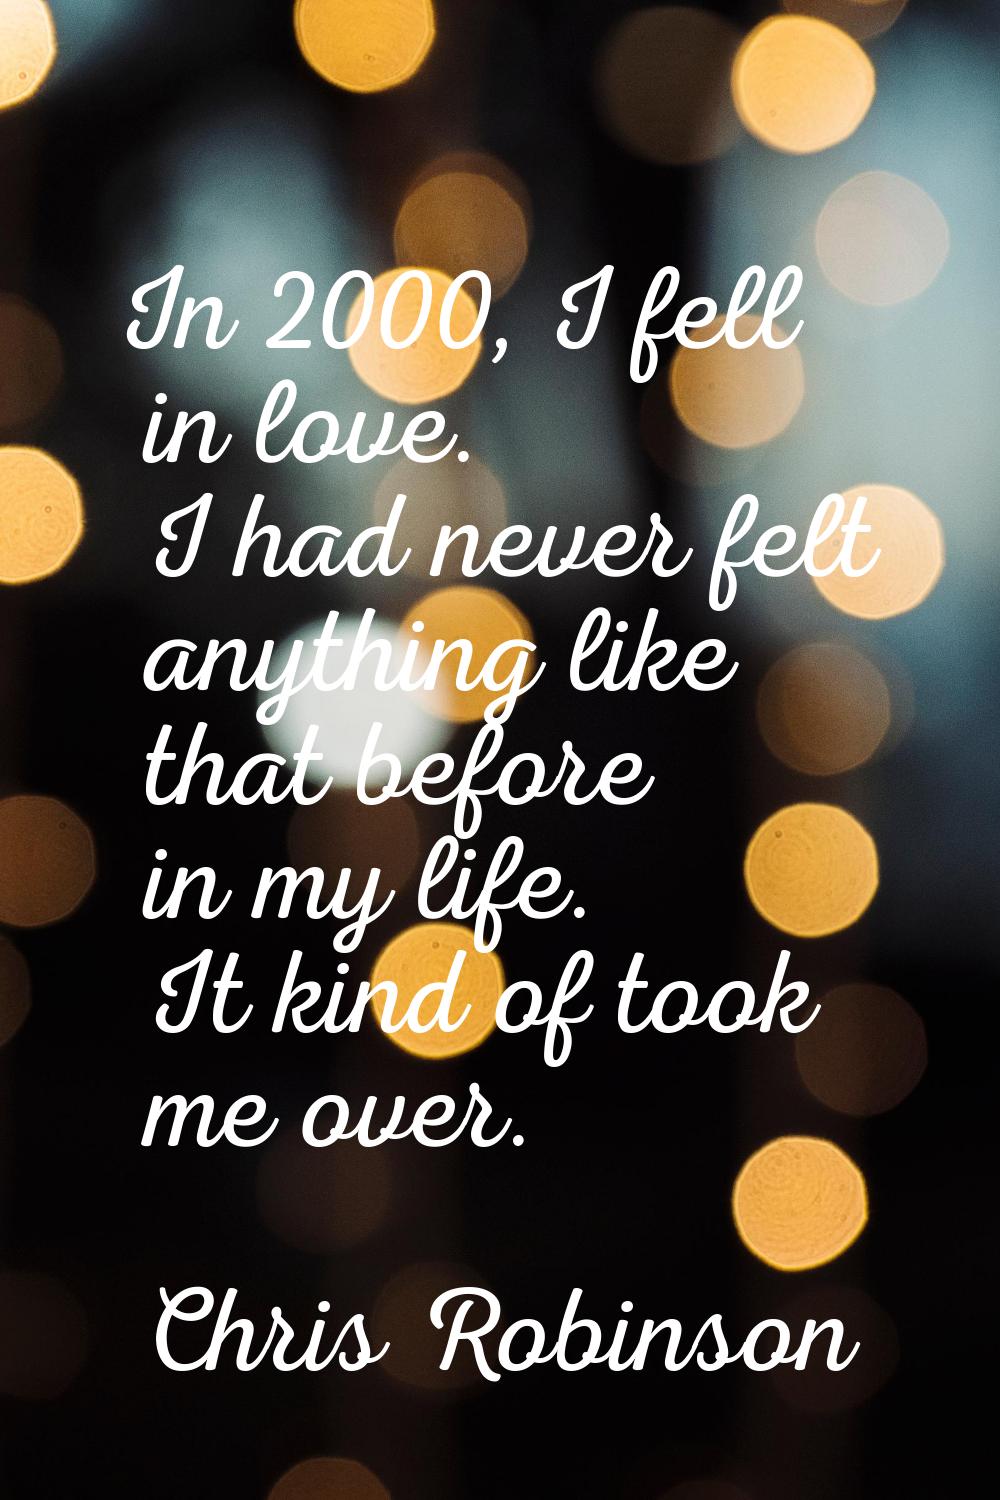 In 2000, I fell in love. I had never felt anything like that before in my life. It kind of took me 